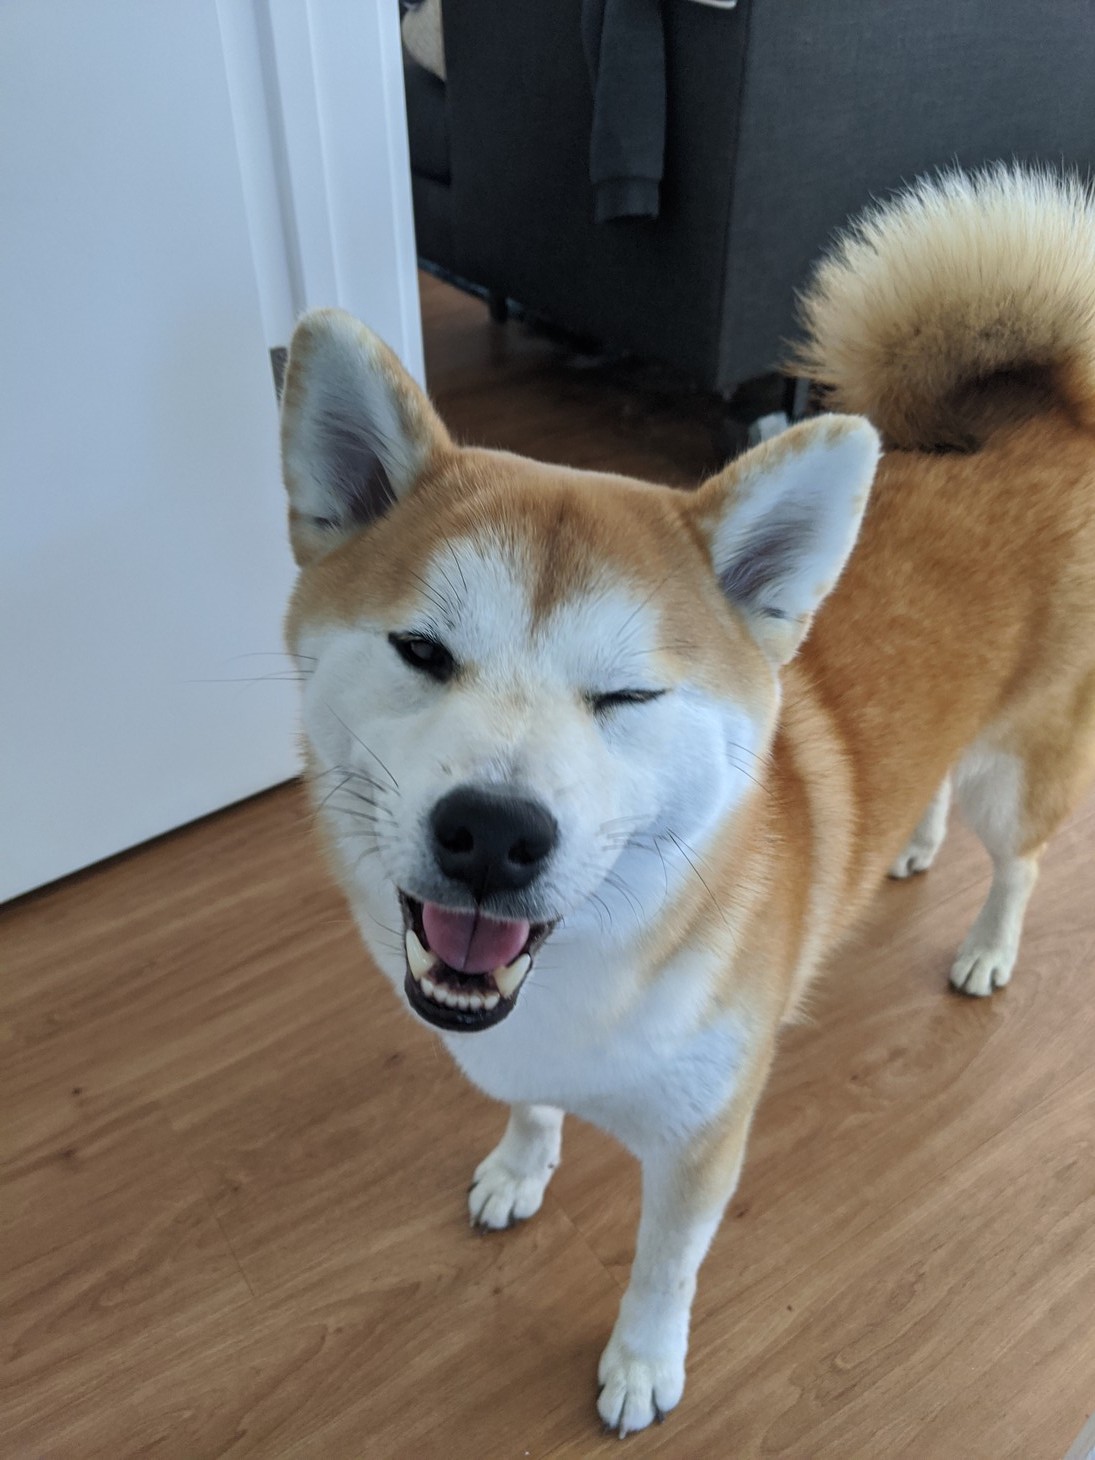 A shiba inu - this wink is for you